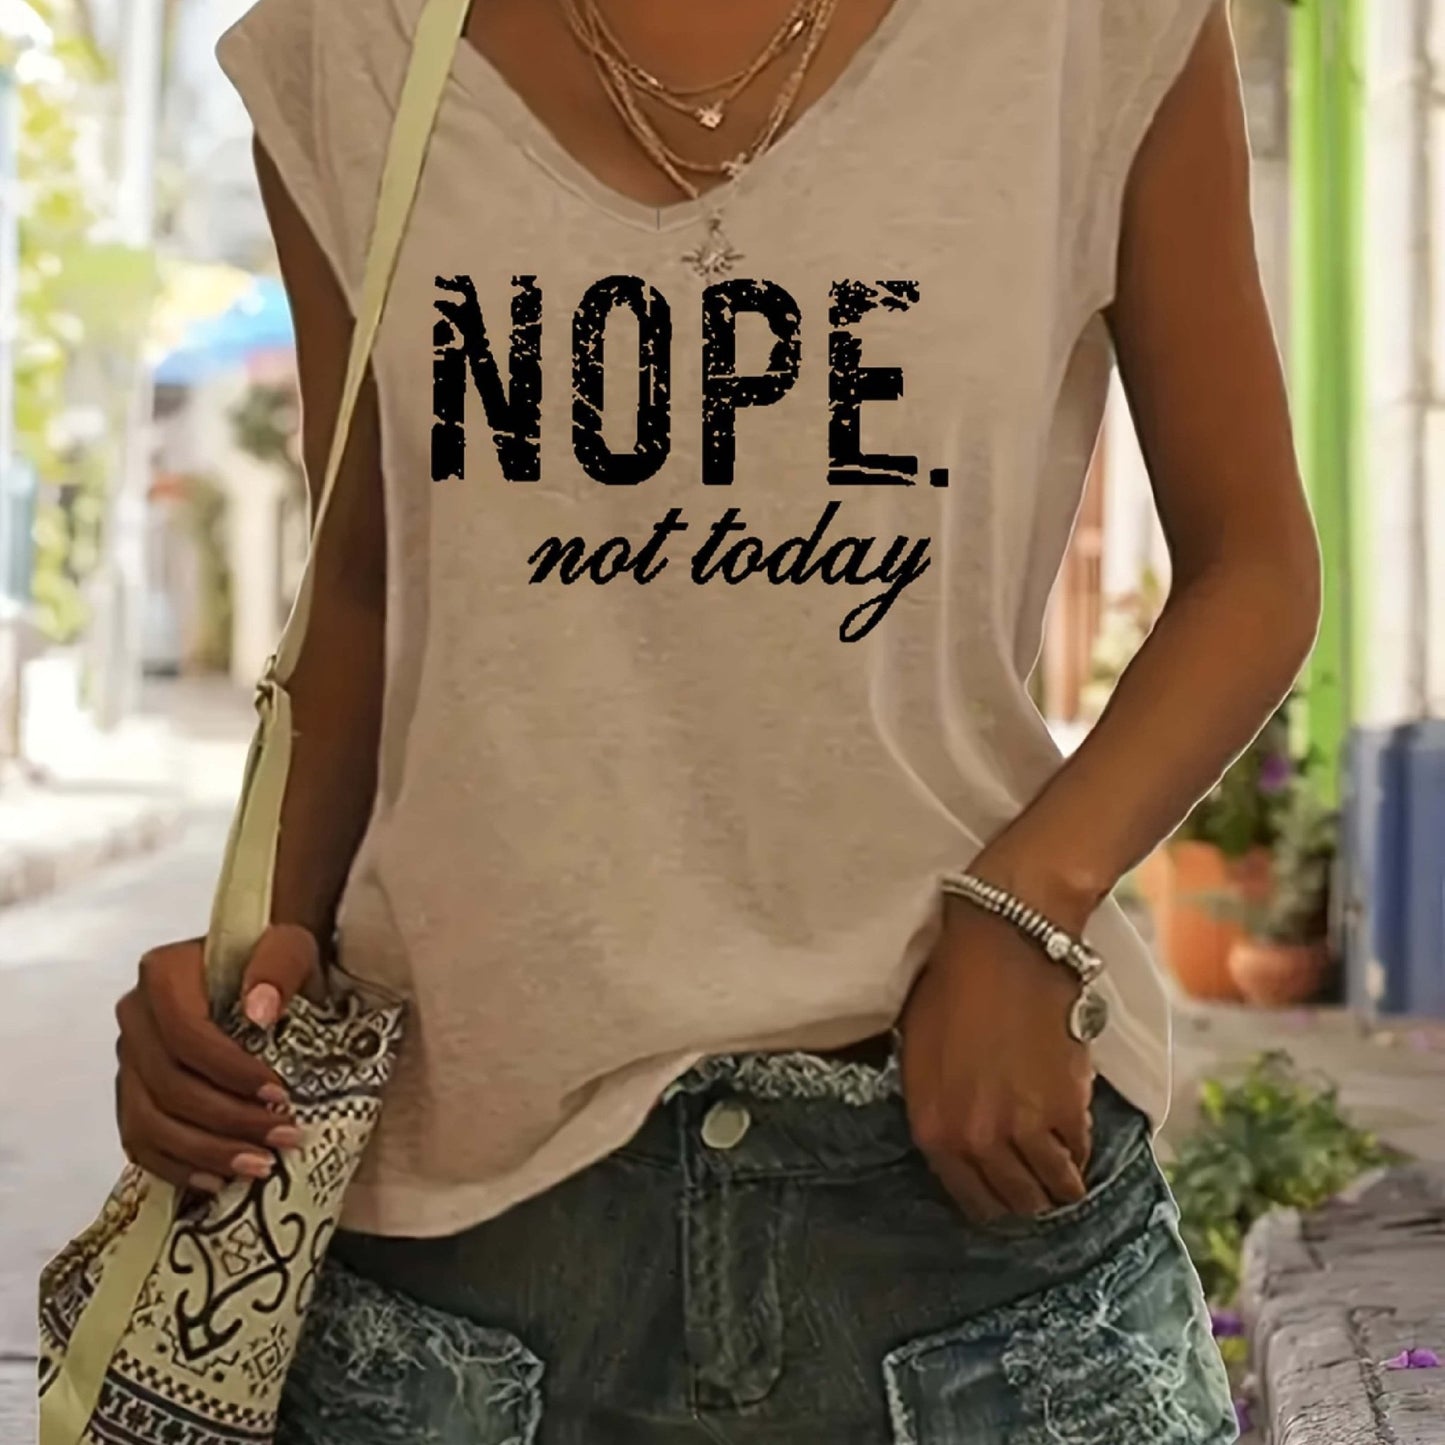 "Nope. Not Today" Letter Print T-shirts, V-neck Cap Sleeve Fashion Top, Women's Clothing - LESSANA